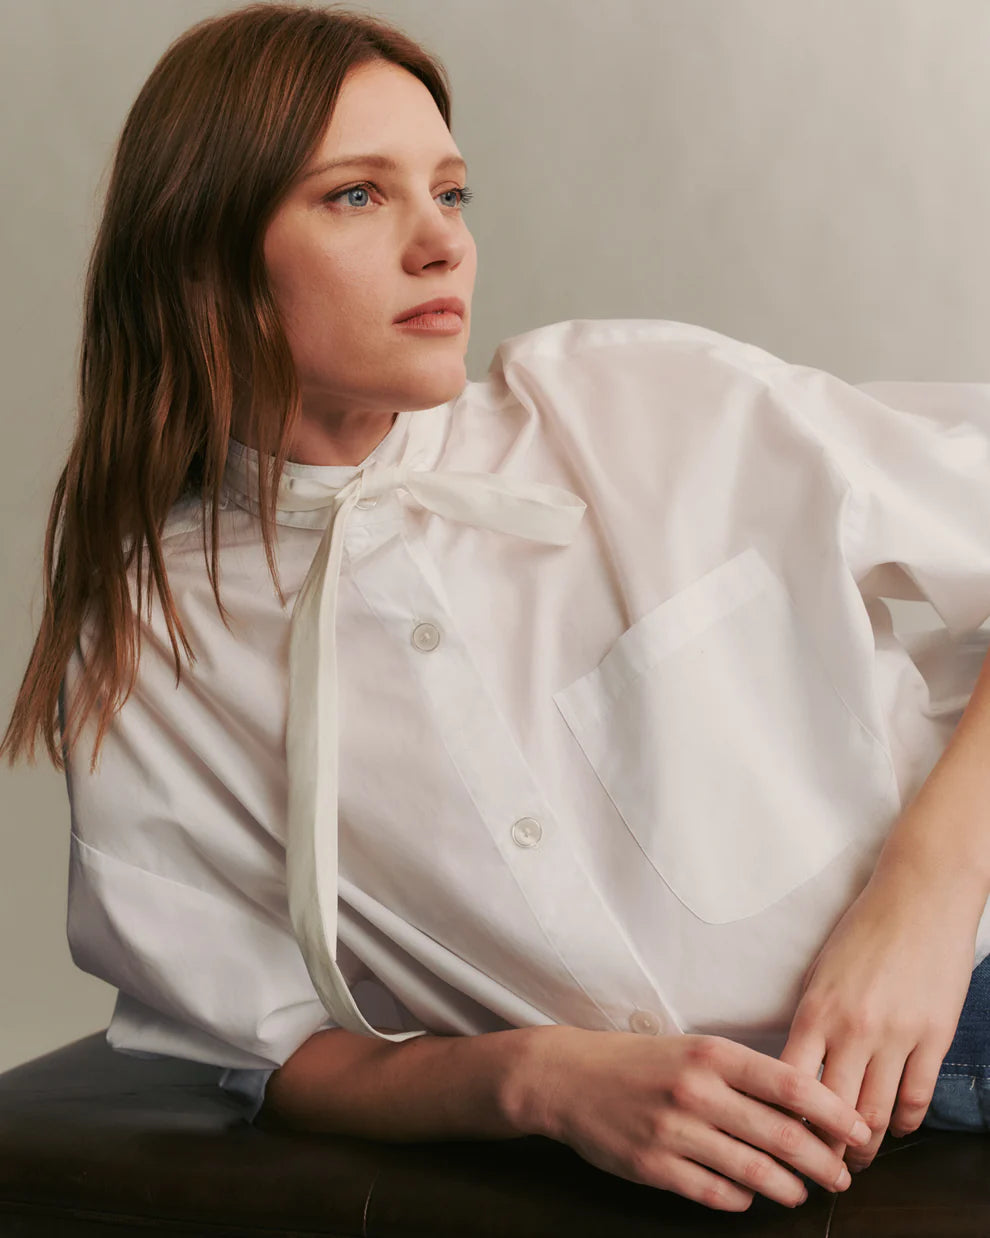 TWP DARLING SHIRT IN SUPERFINE COTTON